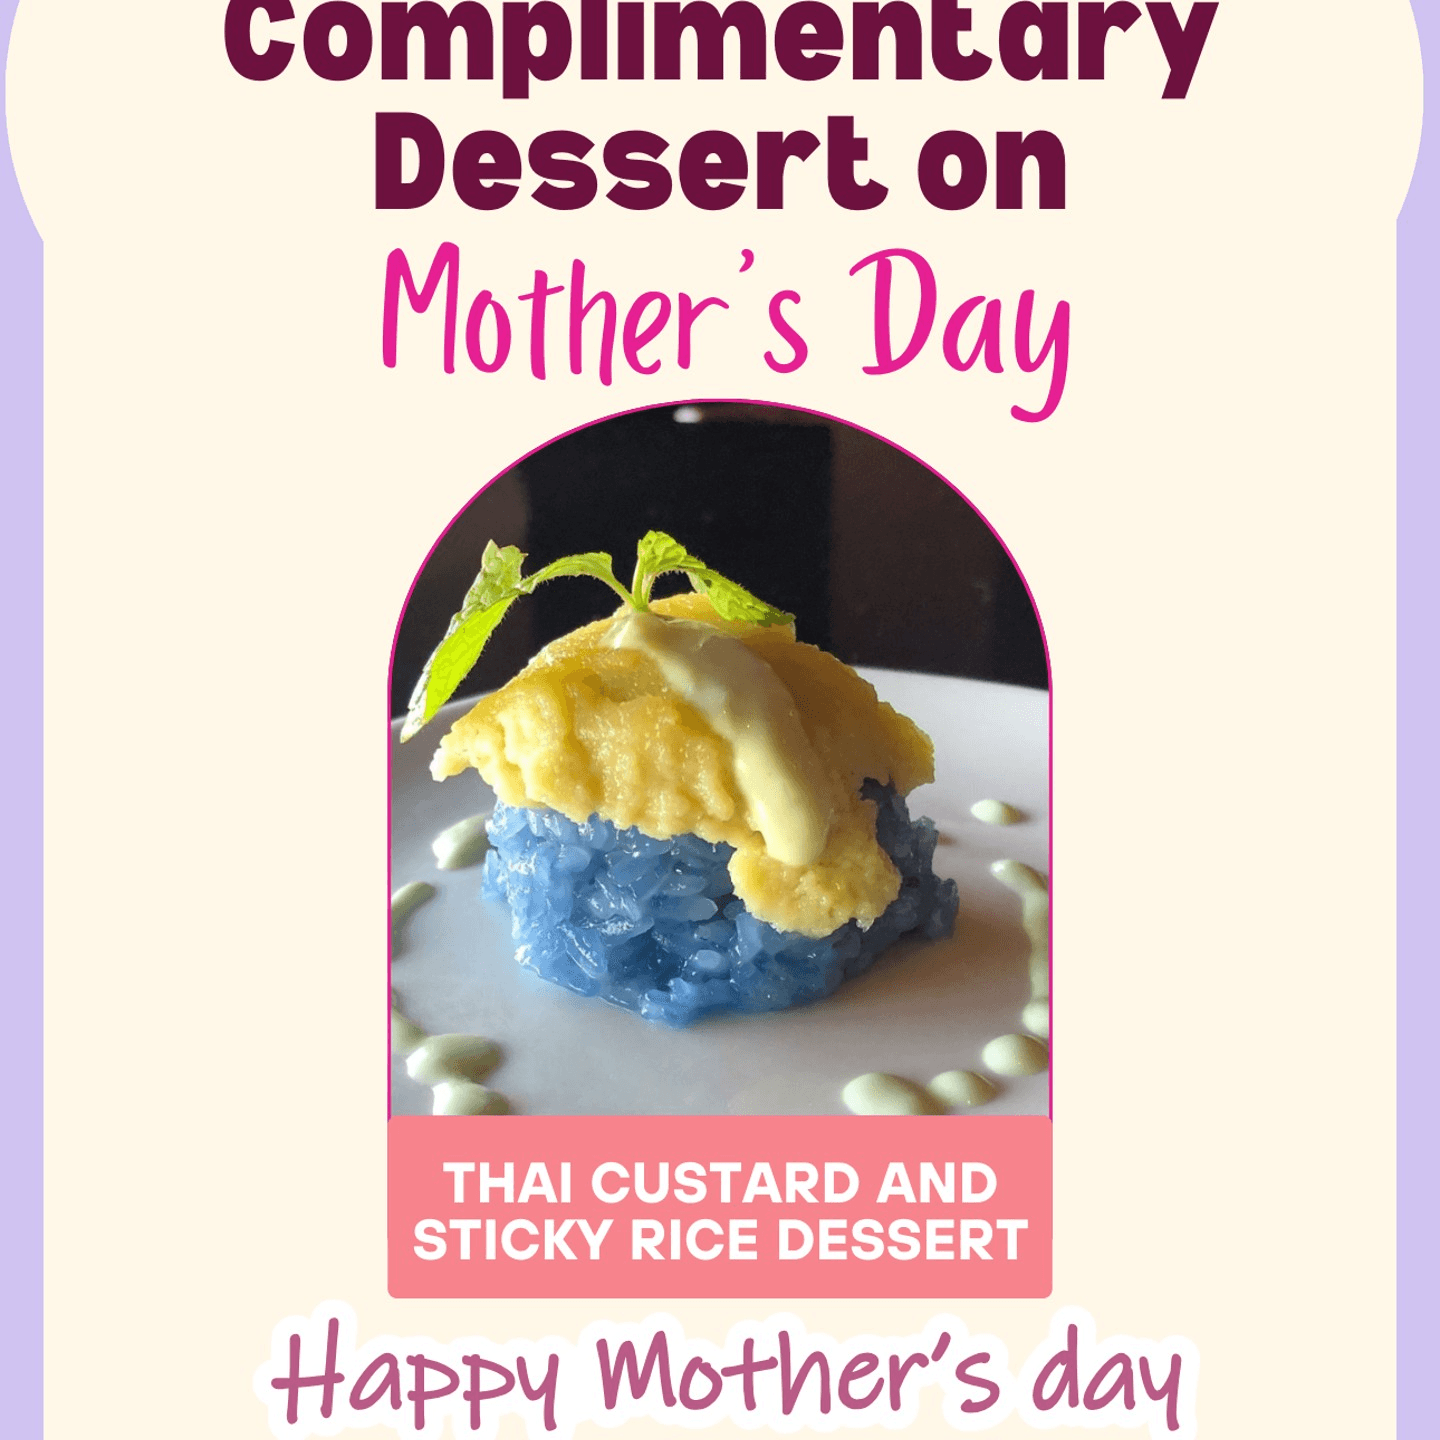  Free Thai Sticky Rice & Custard for Mother's Day!